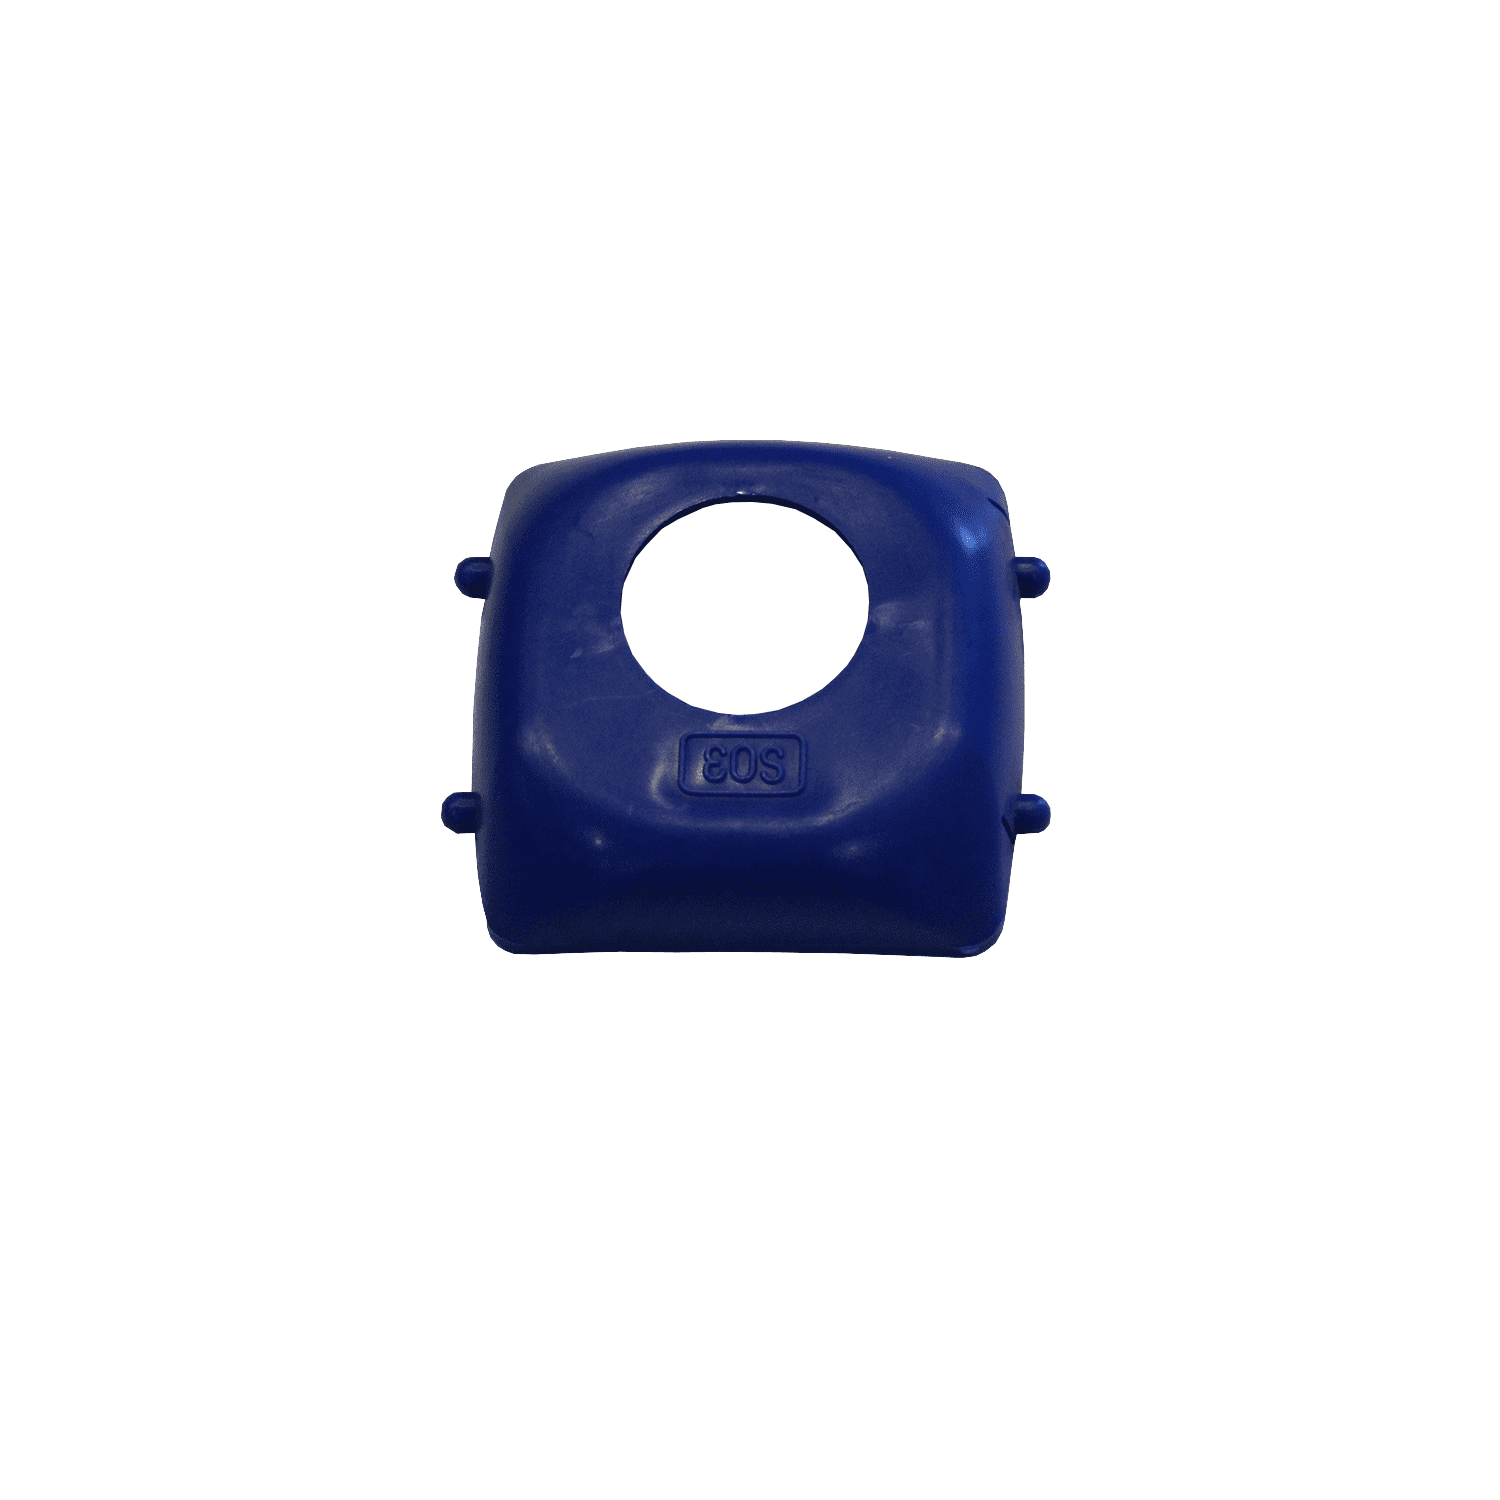 Pool Rover Hammer Cover Plate - 5001074D